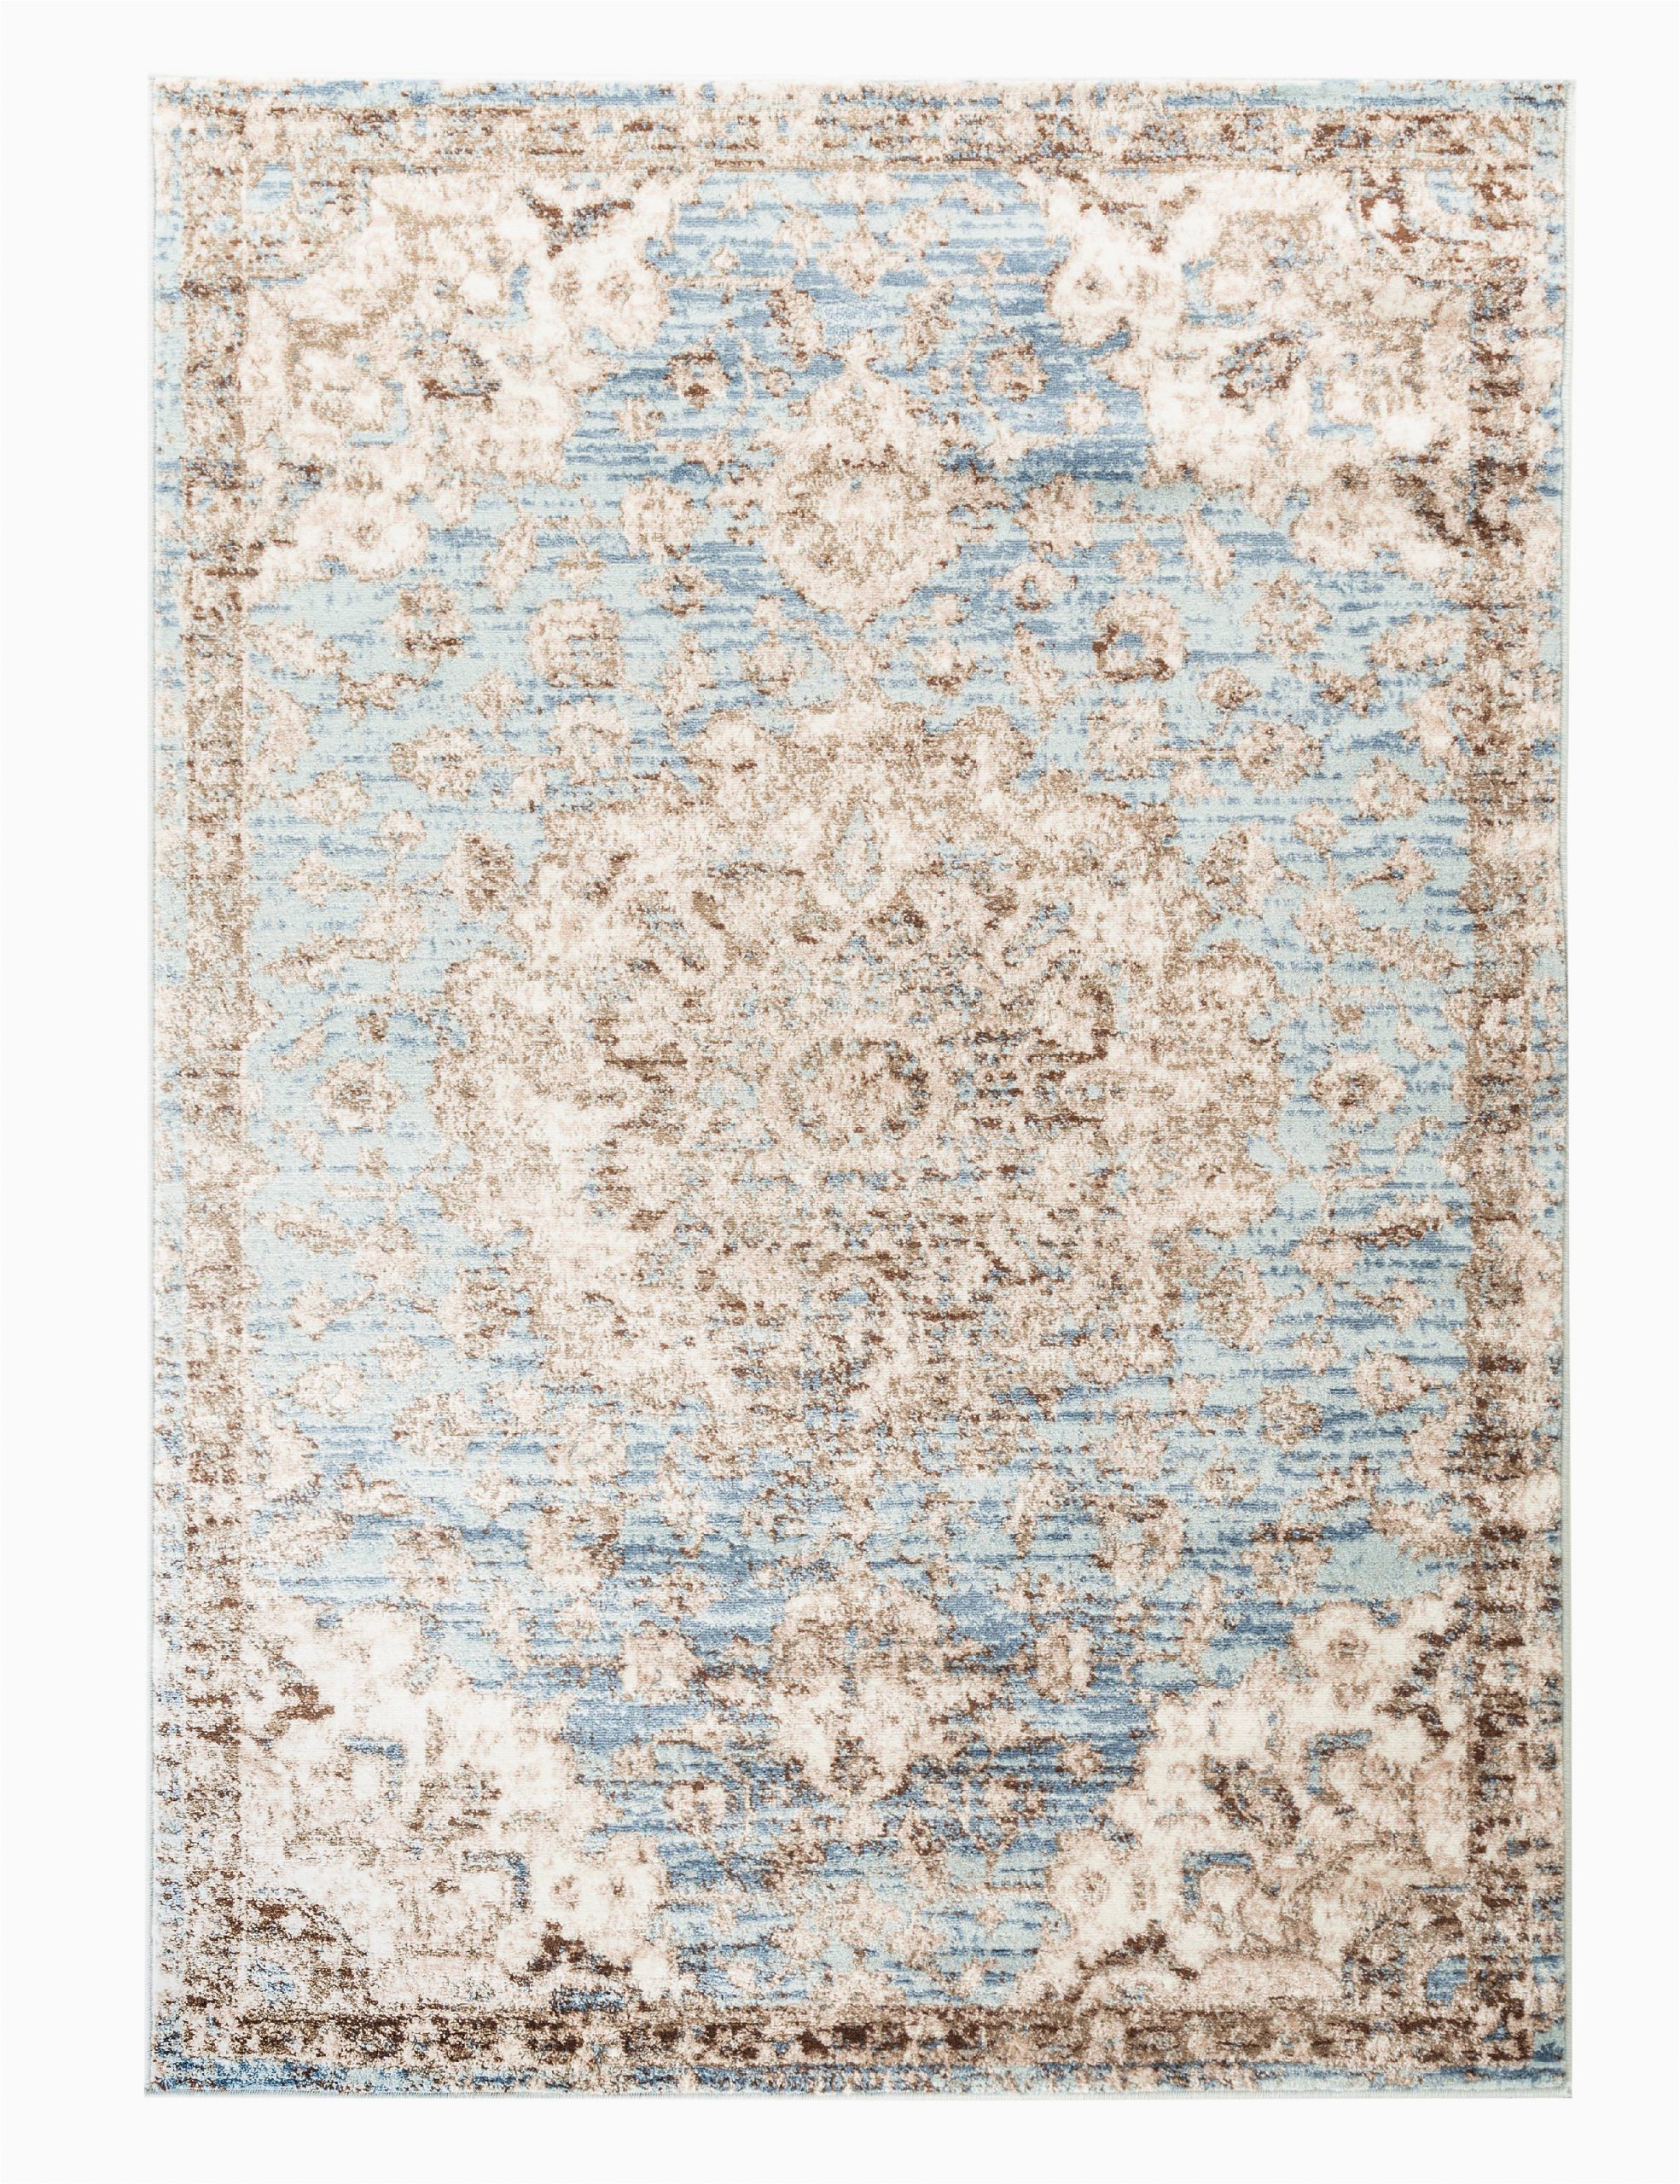 Light Blue and White area Rug Romance Collection Rugs Light Blue White Multi Colored Washed oriental Design Premium soft area Rug 3 X 10 Runner